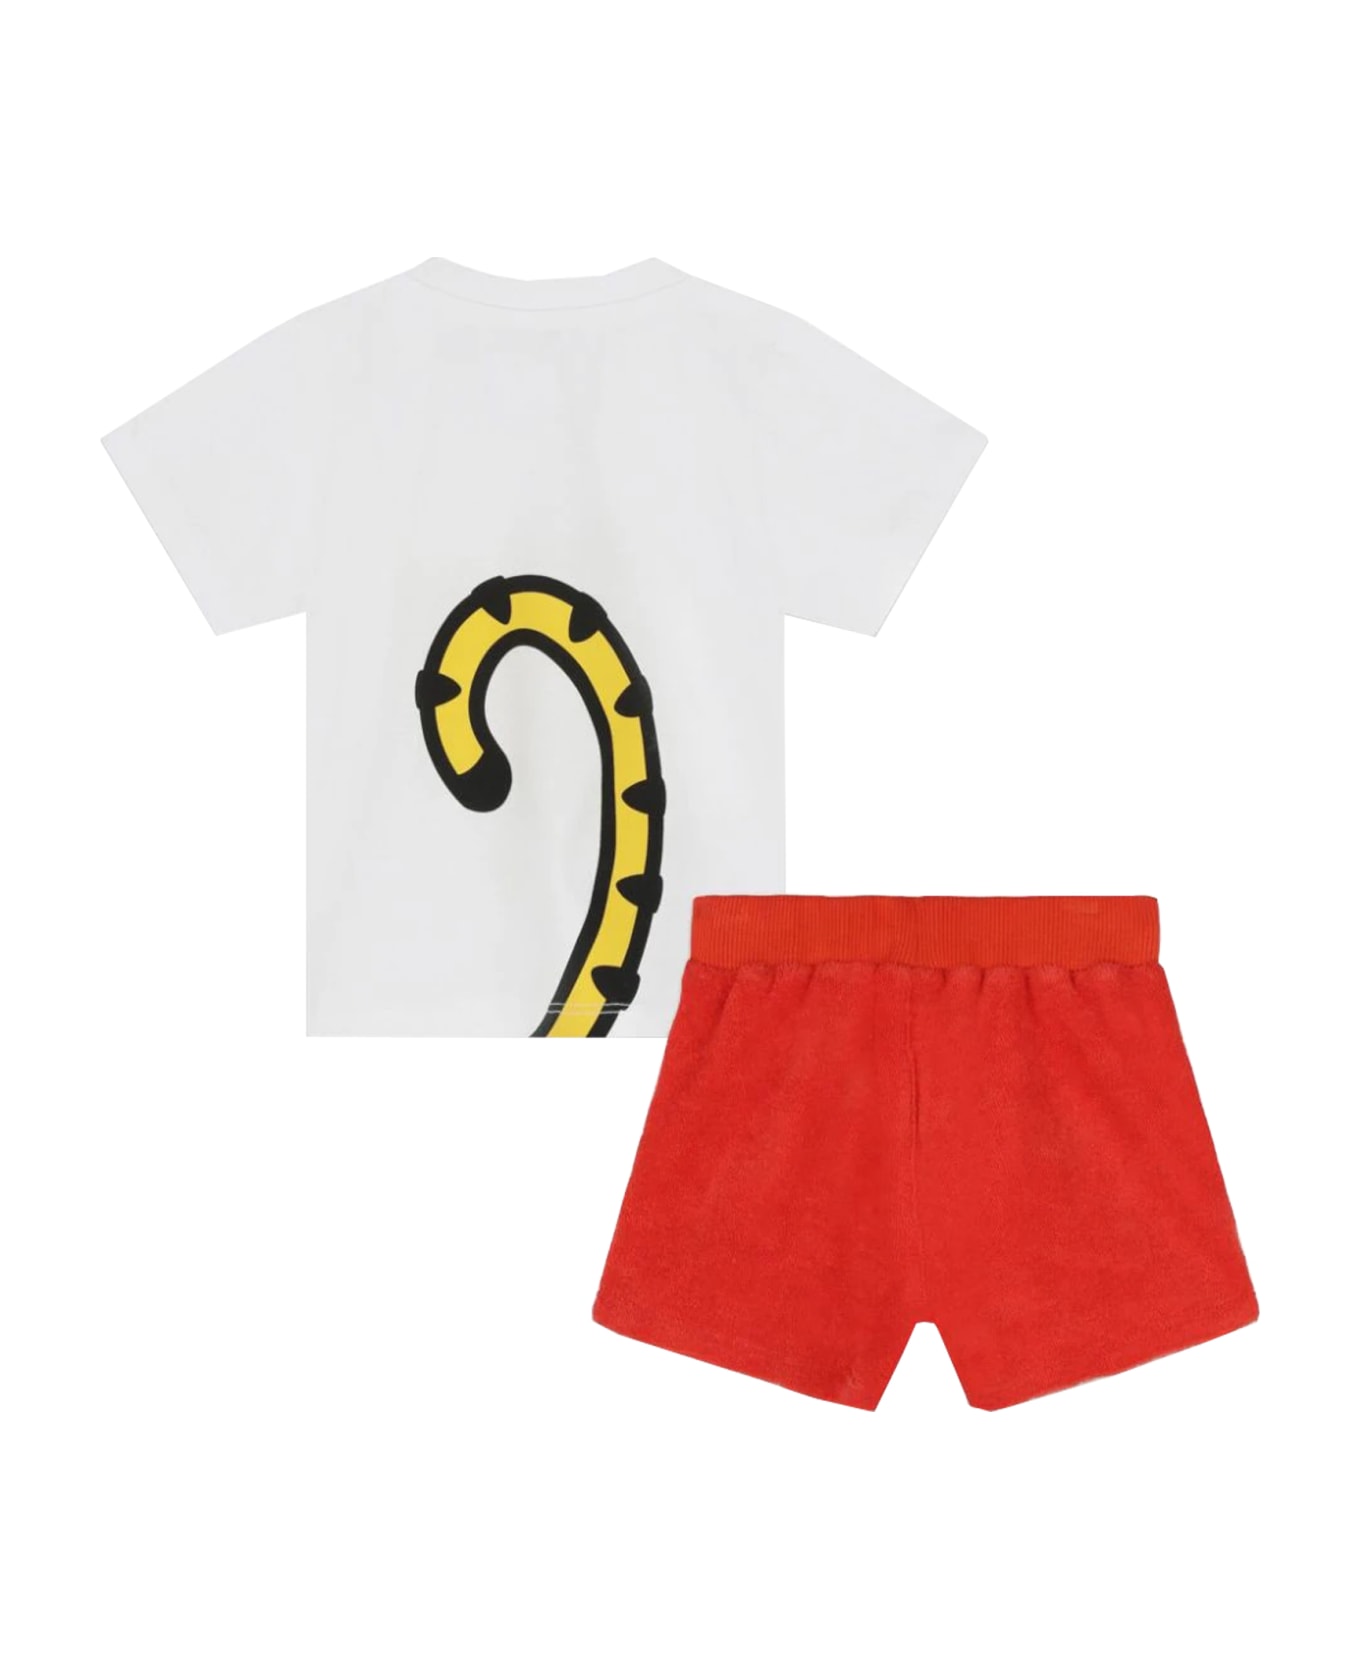 Kenzo T-shirt And Shorts - Red